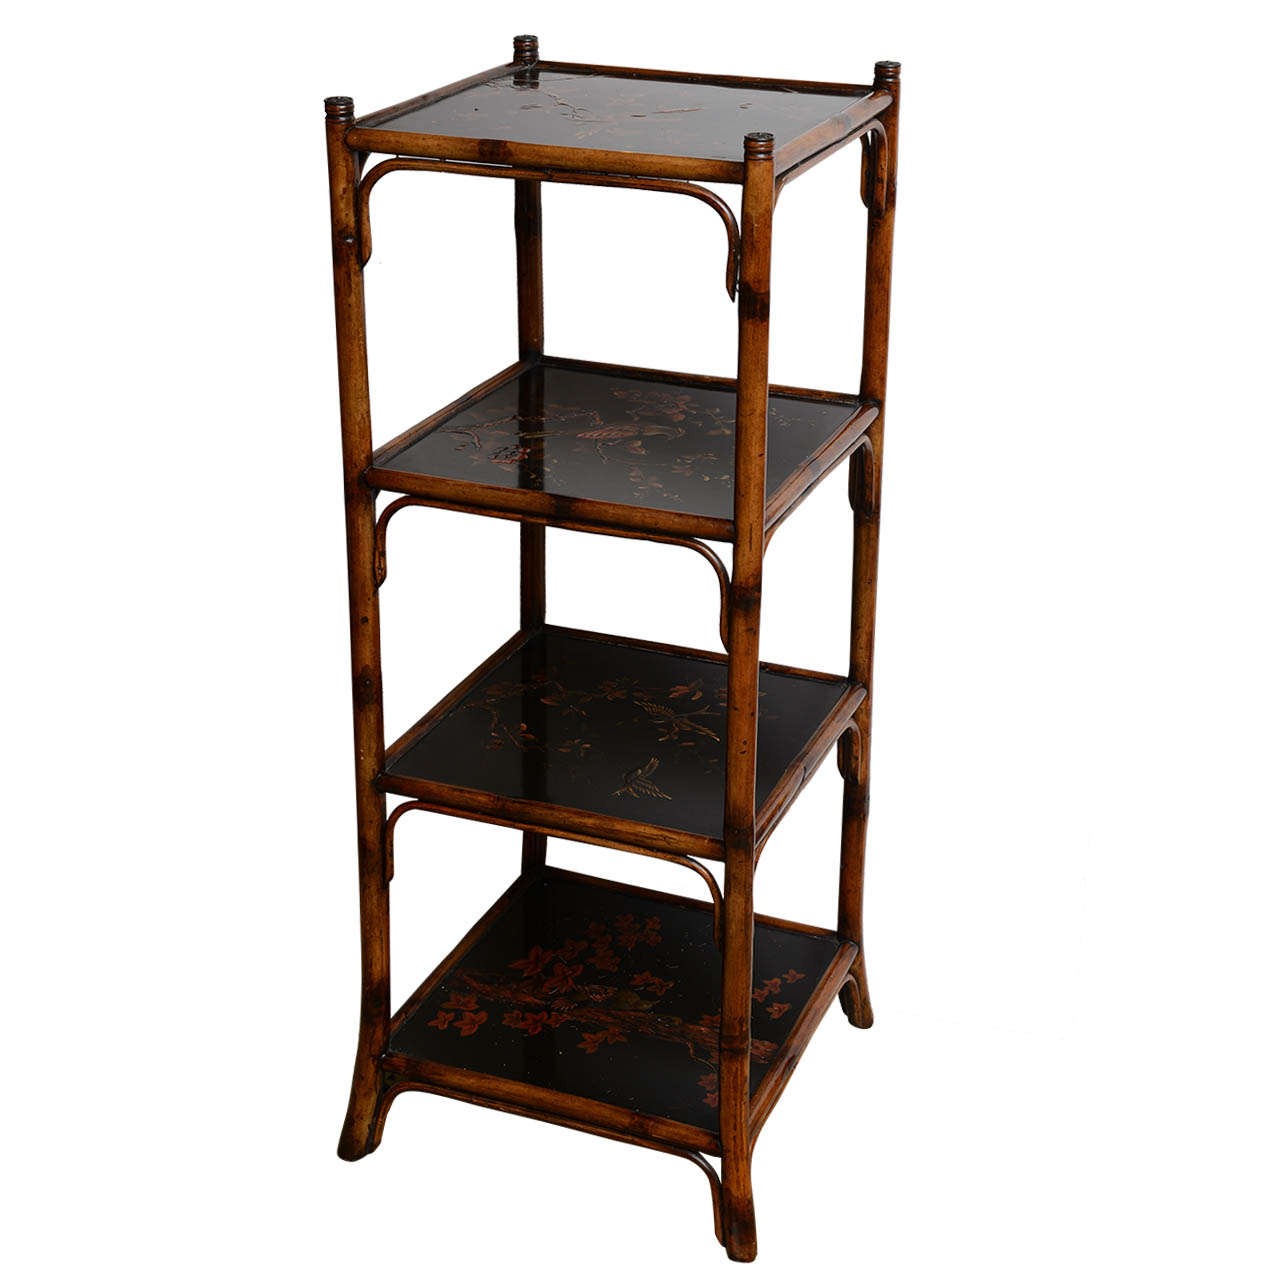 Beautiful 19th c. English Bamboo Tiered Stand